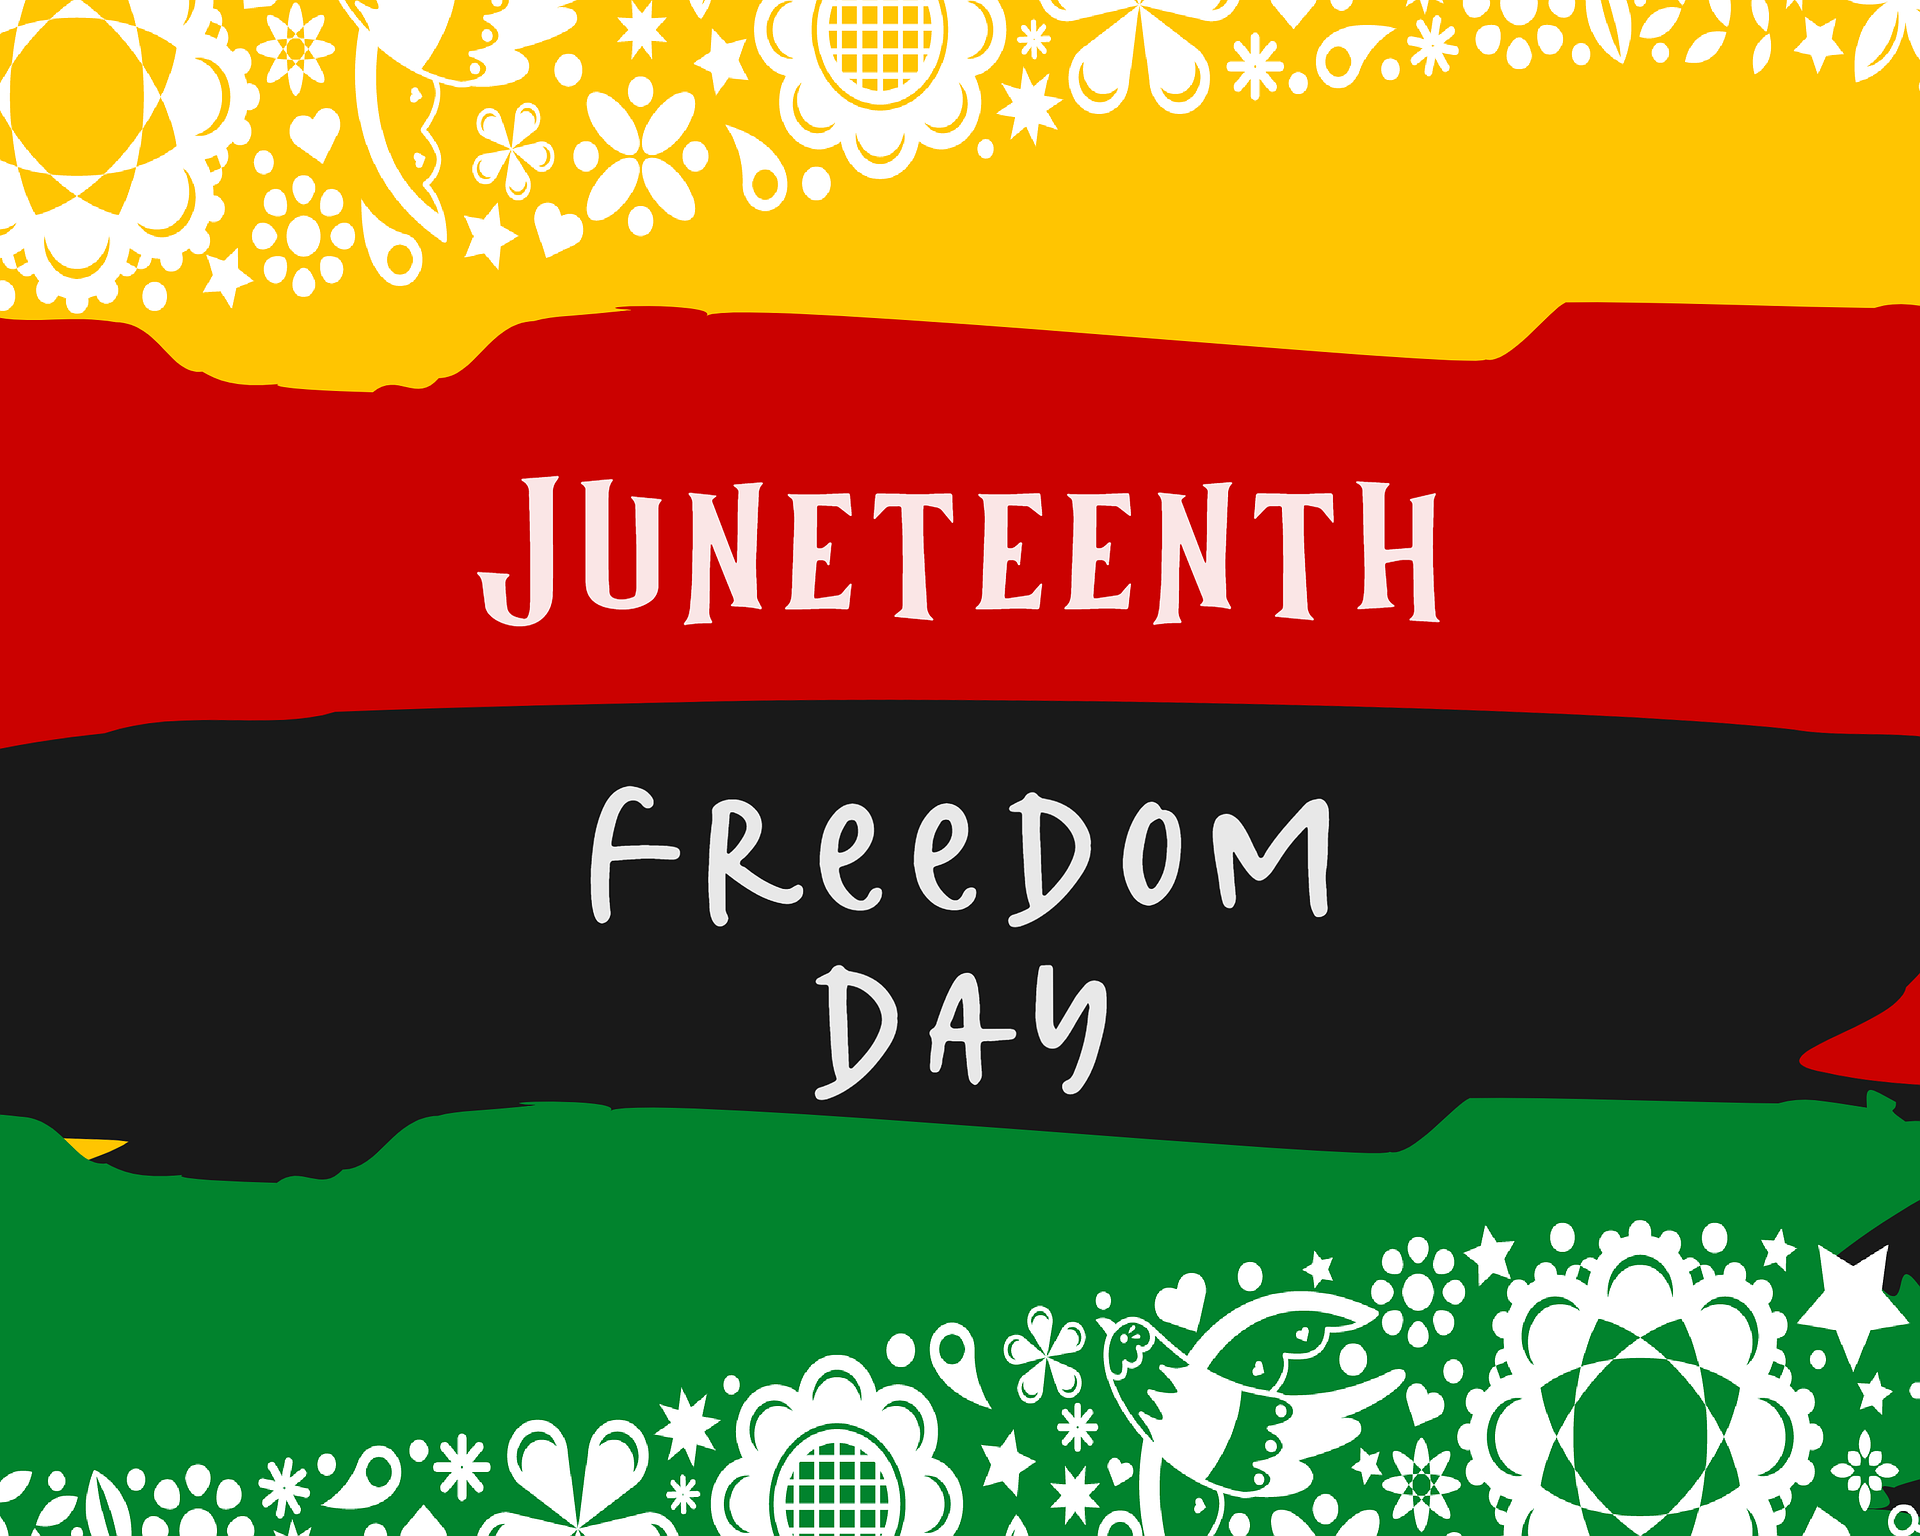 Juneteenth freedom day.